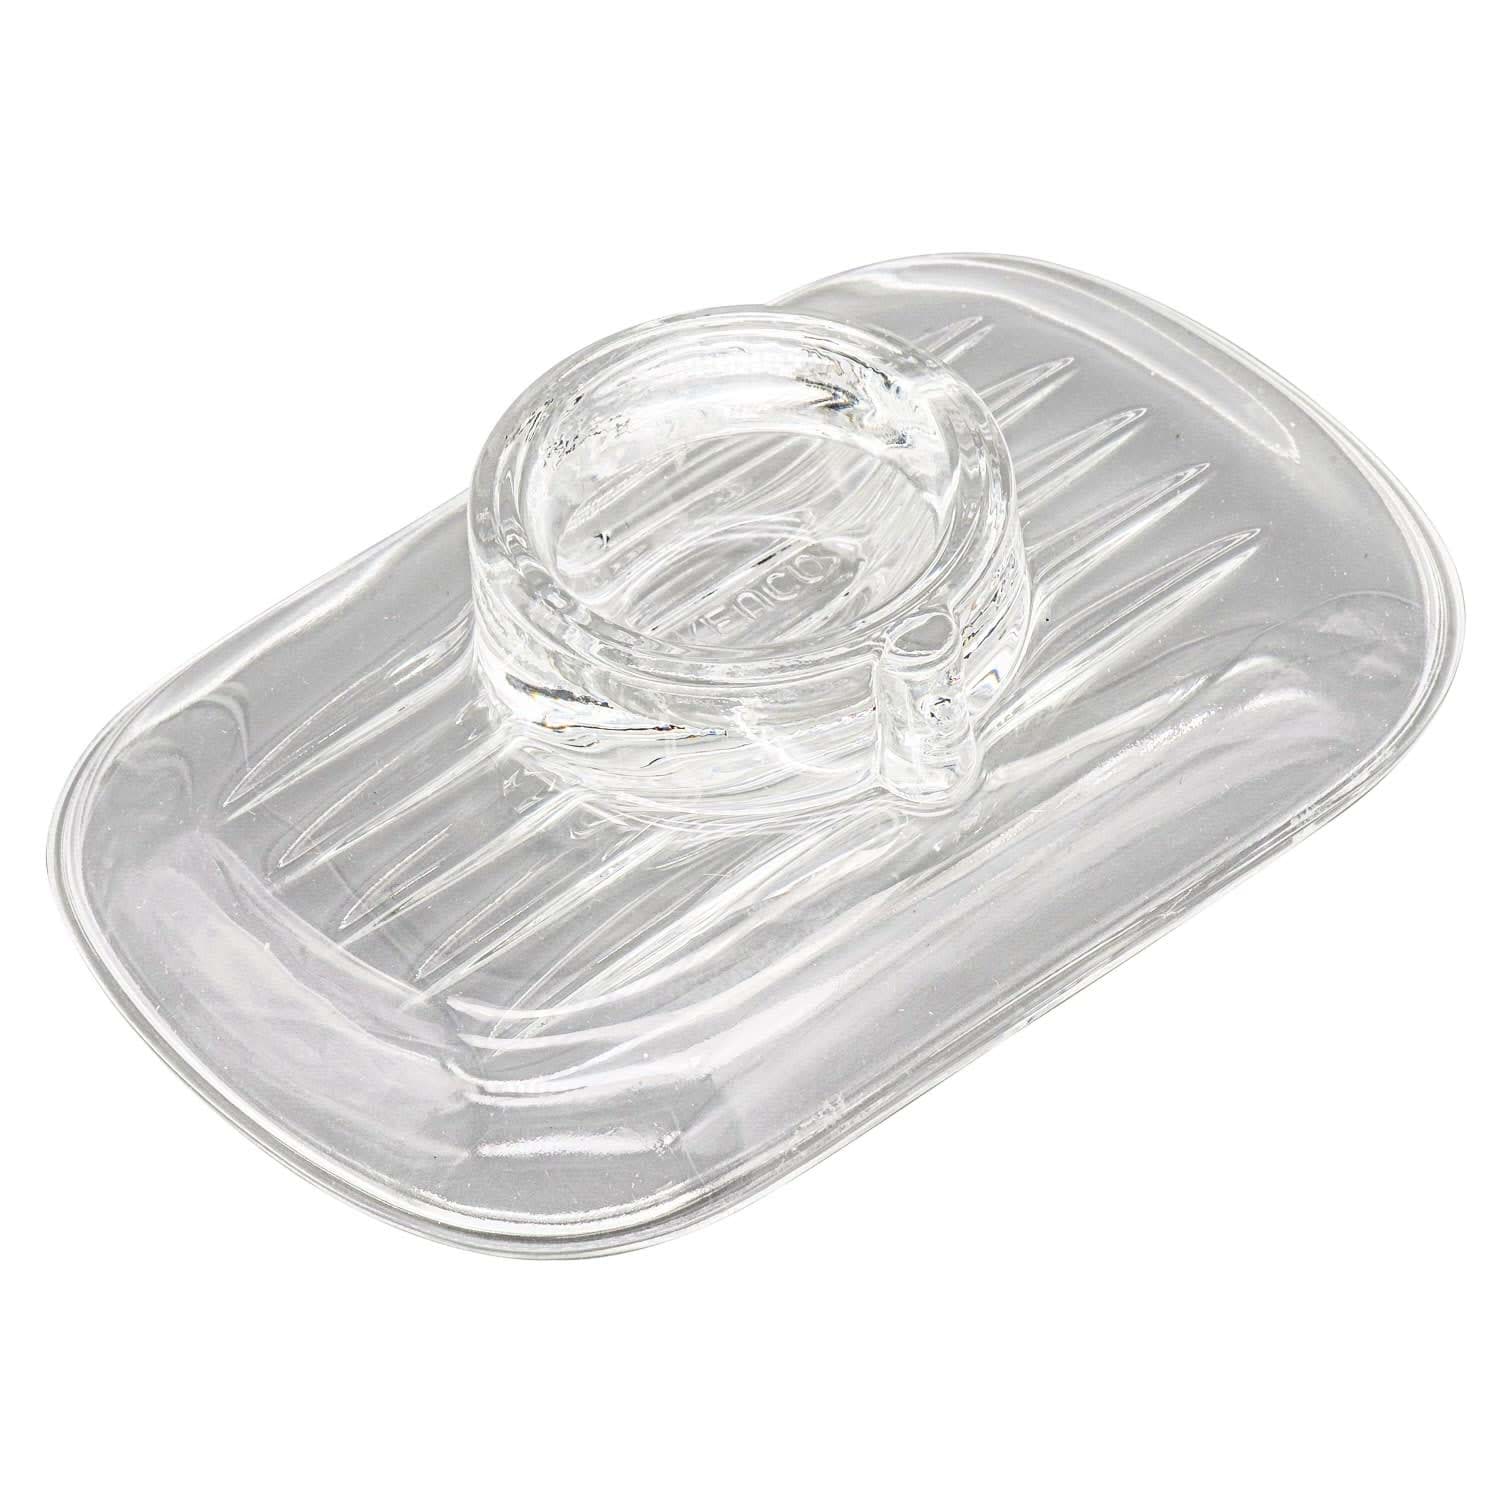 Picture of KEUCO Apollo real crystal soap dish 00655009000